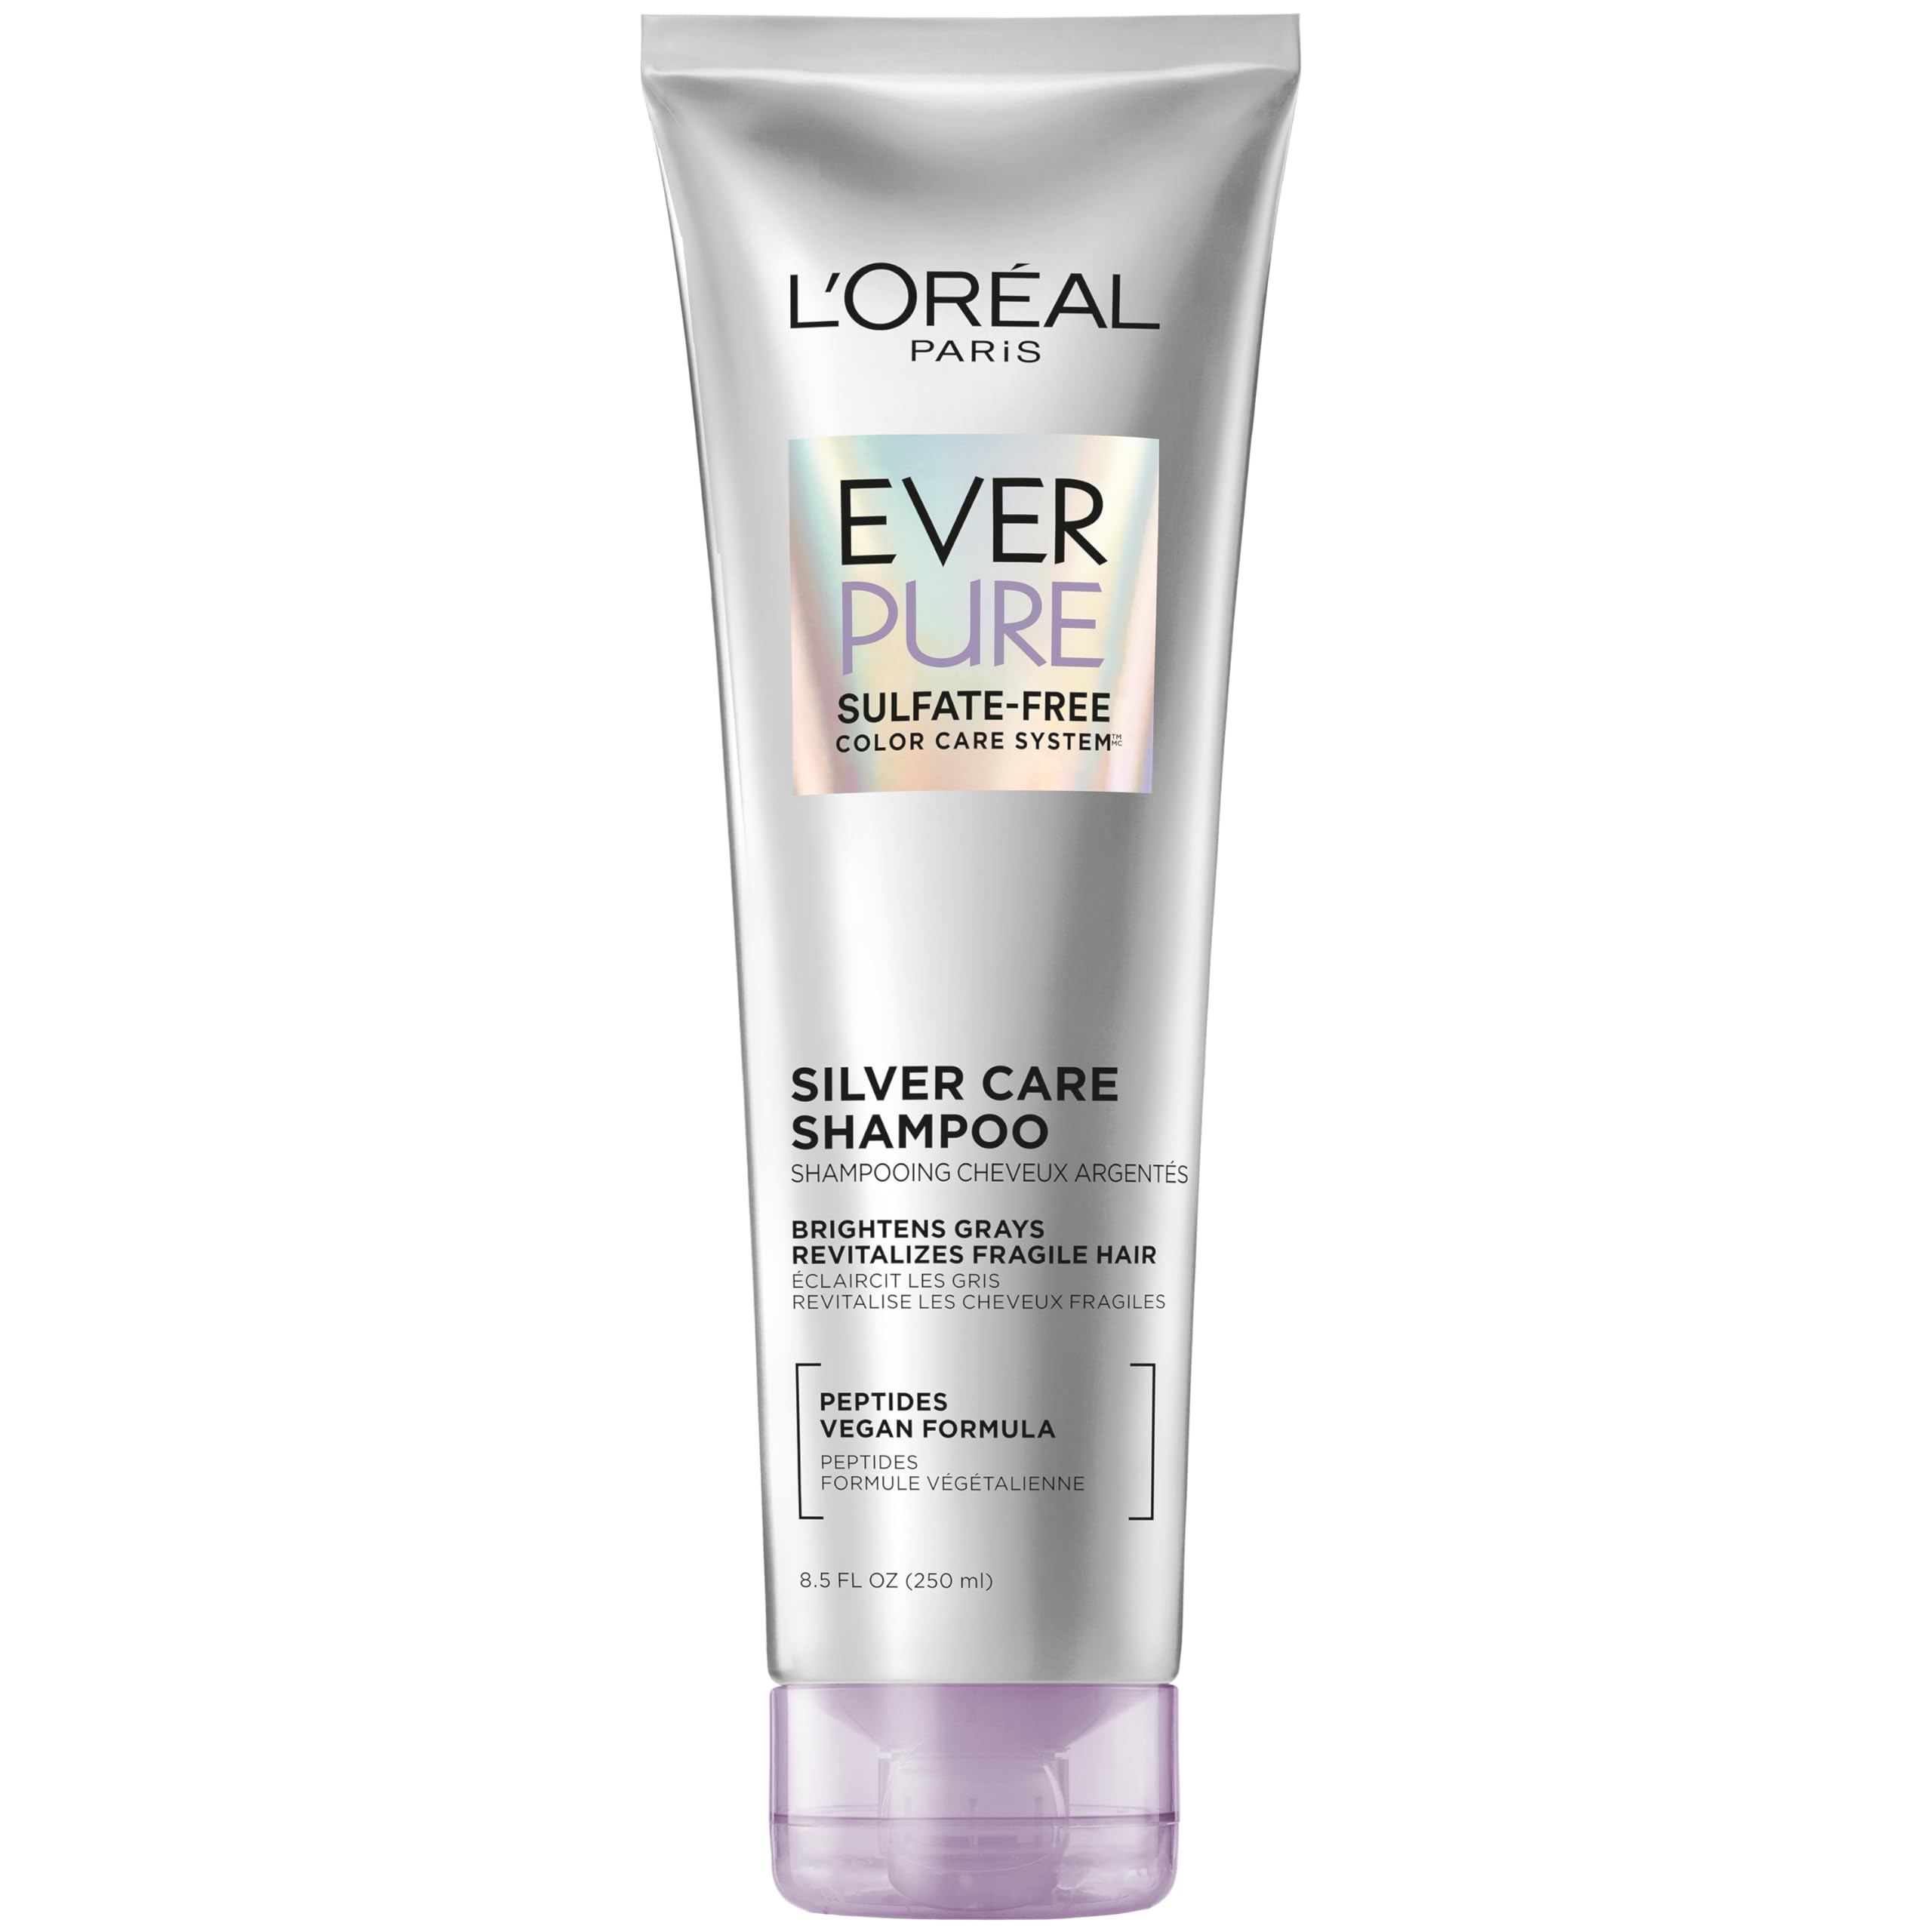 L'Oreal Paris EverPure Silver Care Sulfate Free Shampoo, Brightening and Nourishing Hair Care for Gray and Silver Hair, Vegan Formula with Peptides, 8.5 Fl Oz